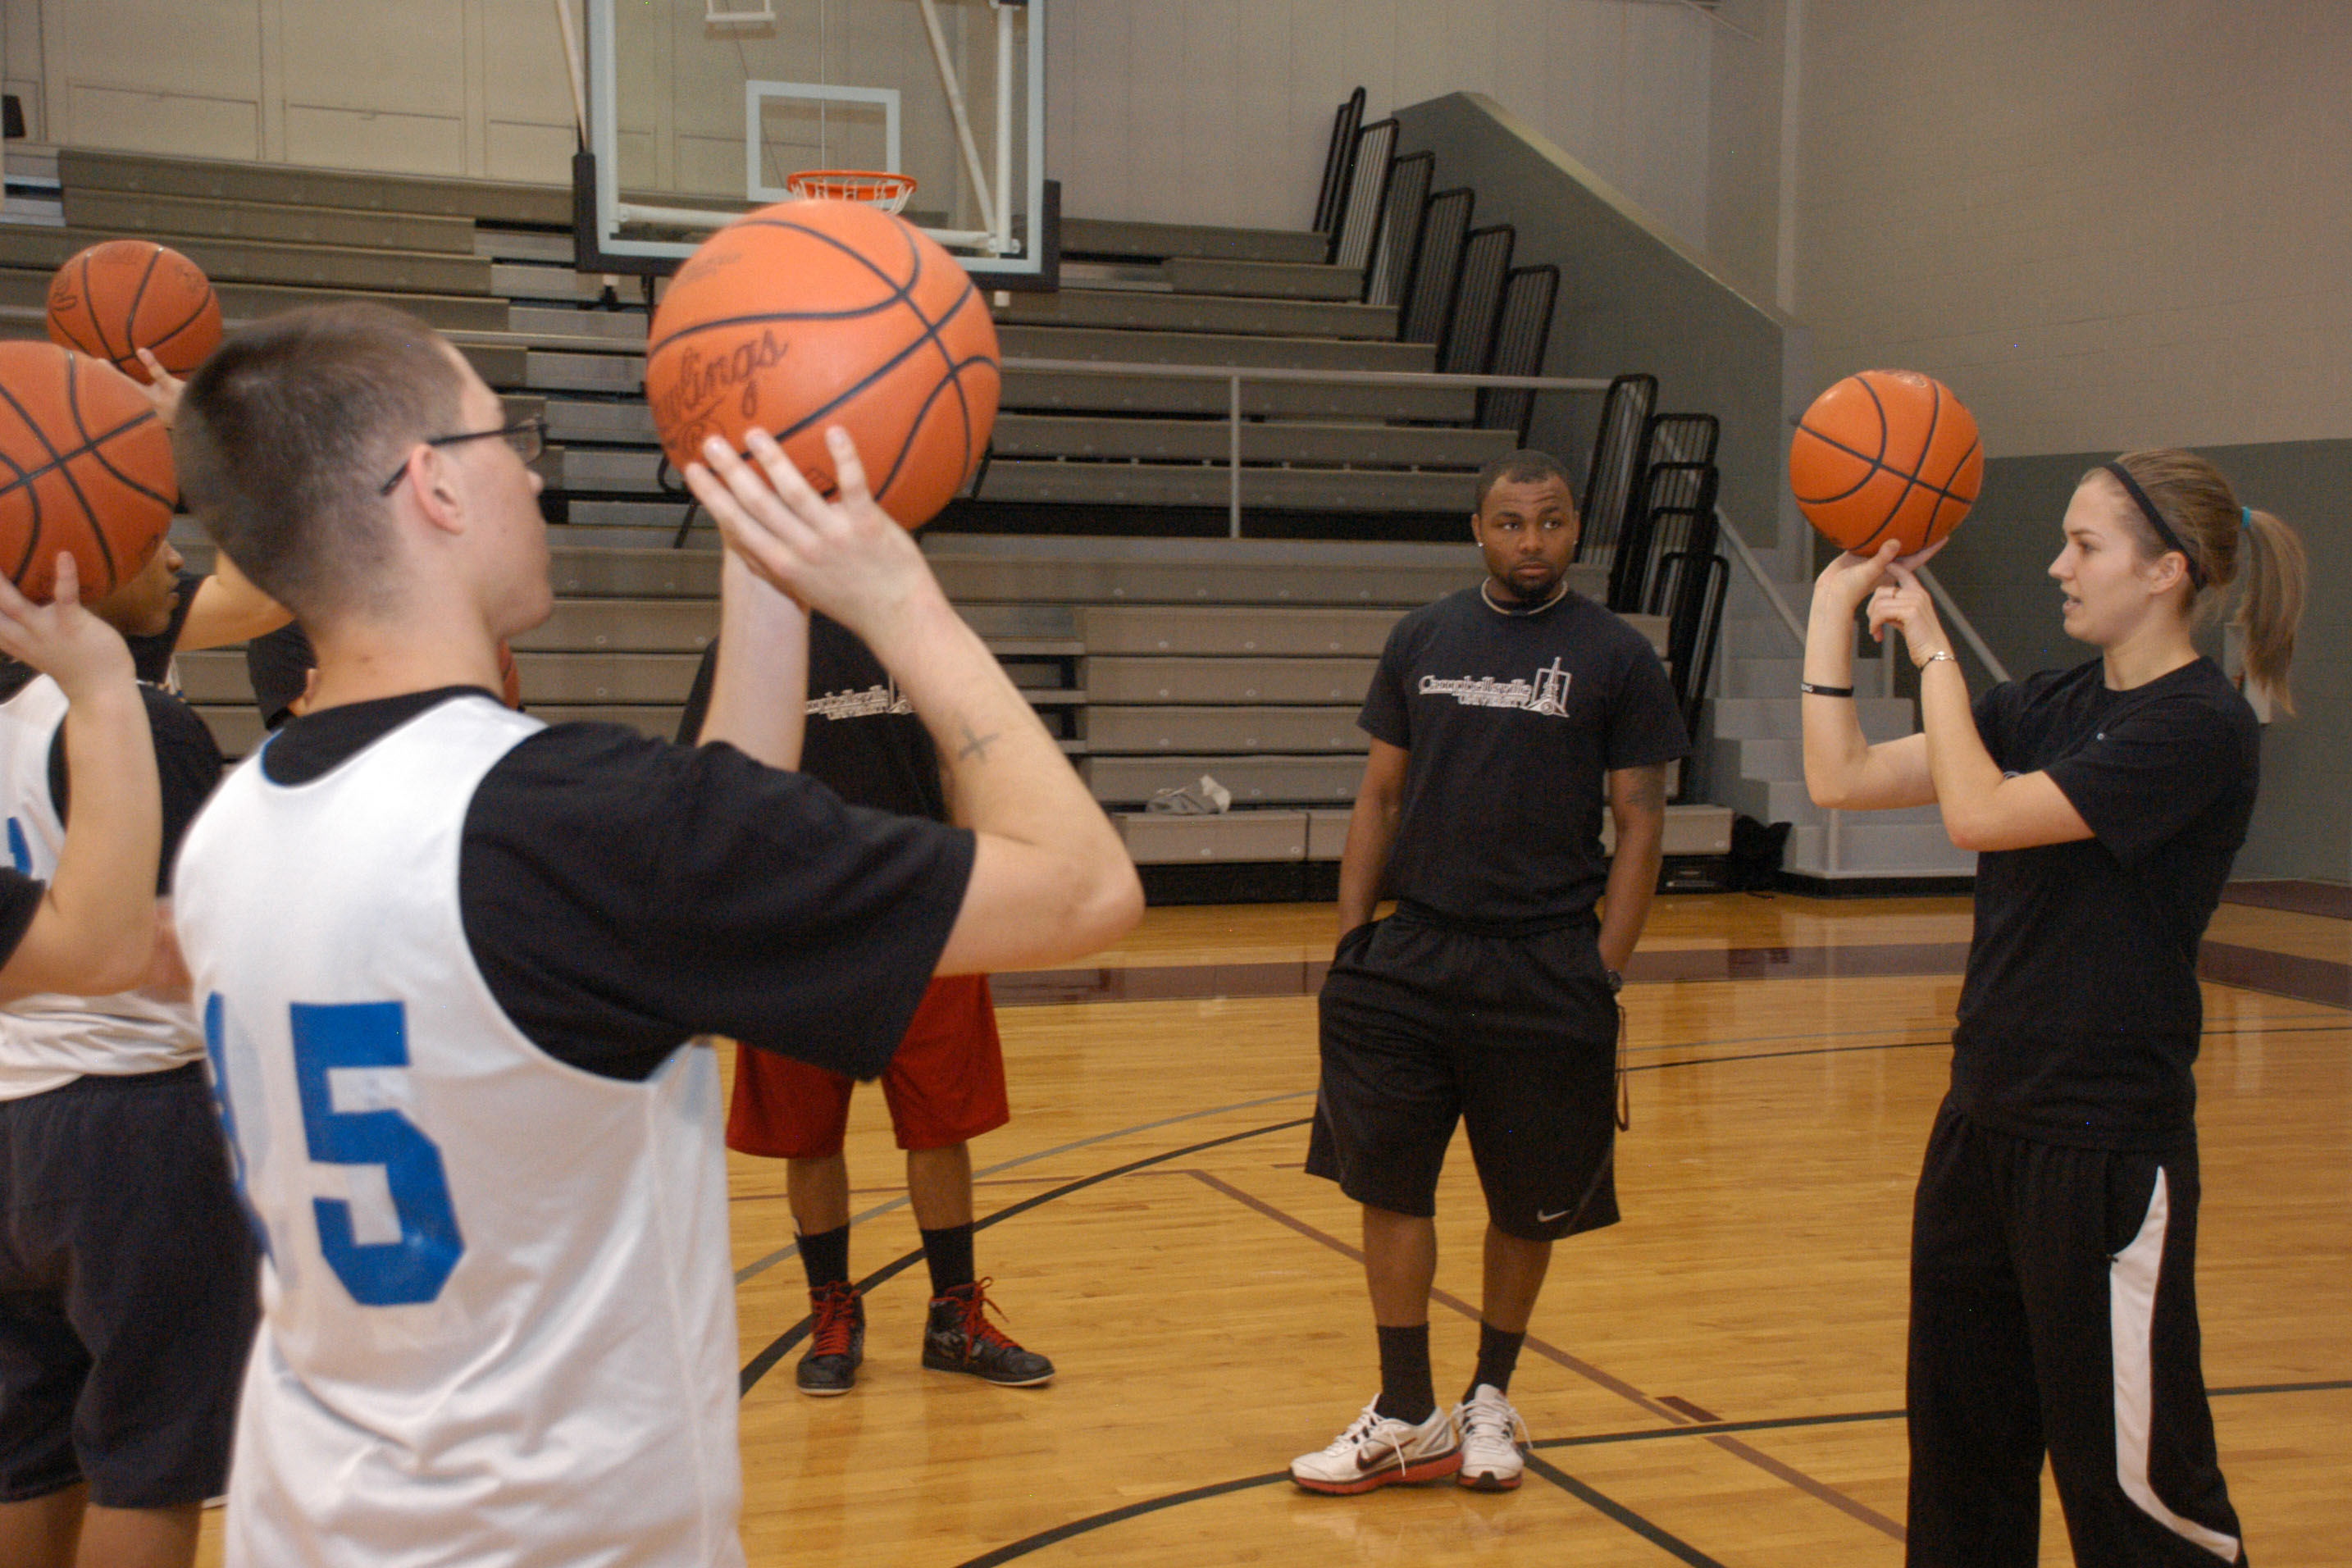 Campbellsville University Lady Tiger basketball senior Courtney Danis of Mt. Sterling, Ky., helps teach basketball with the boys from Lincoln Village. Jeffery Demary, a cornerback with the CU football team from Columbia, S.C., assists Danis. (Campbellsville University Photo by Chris Megginson)